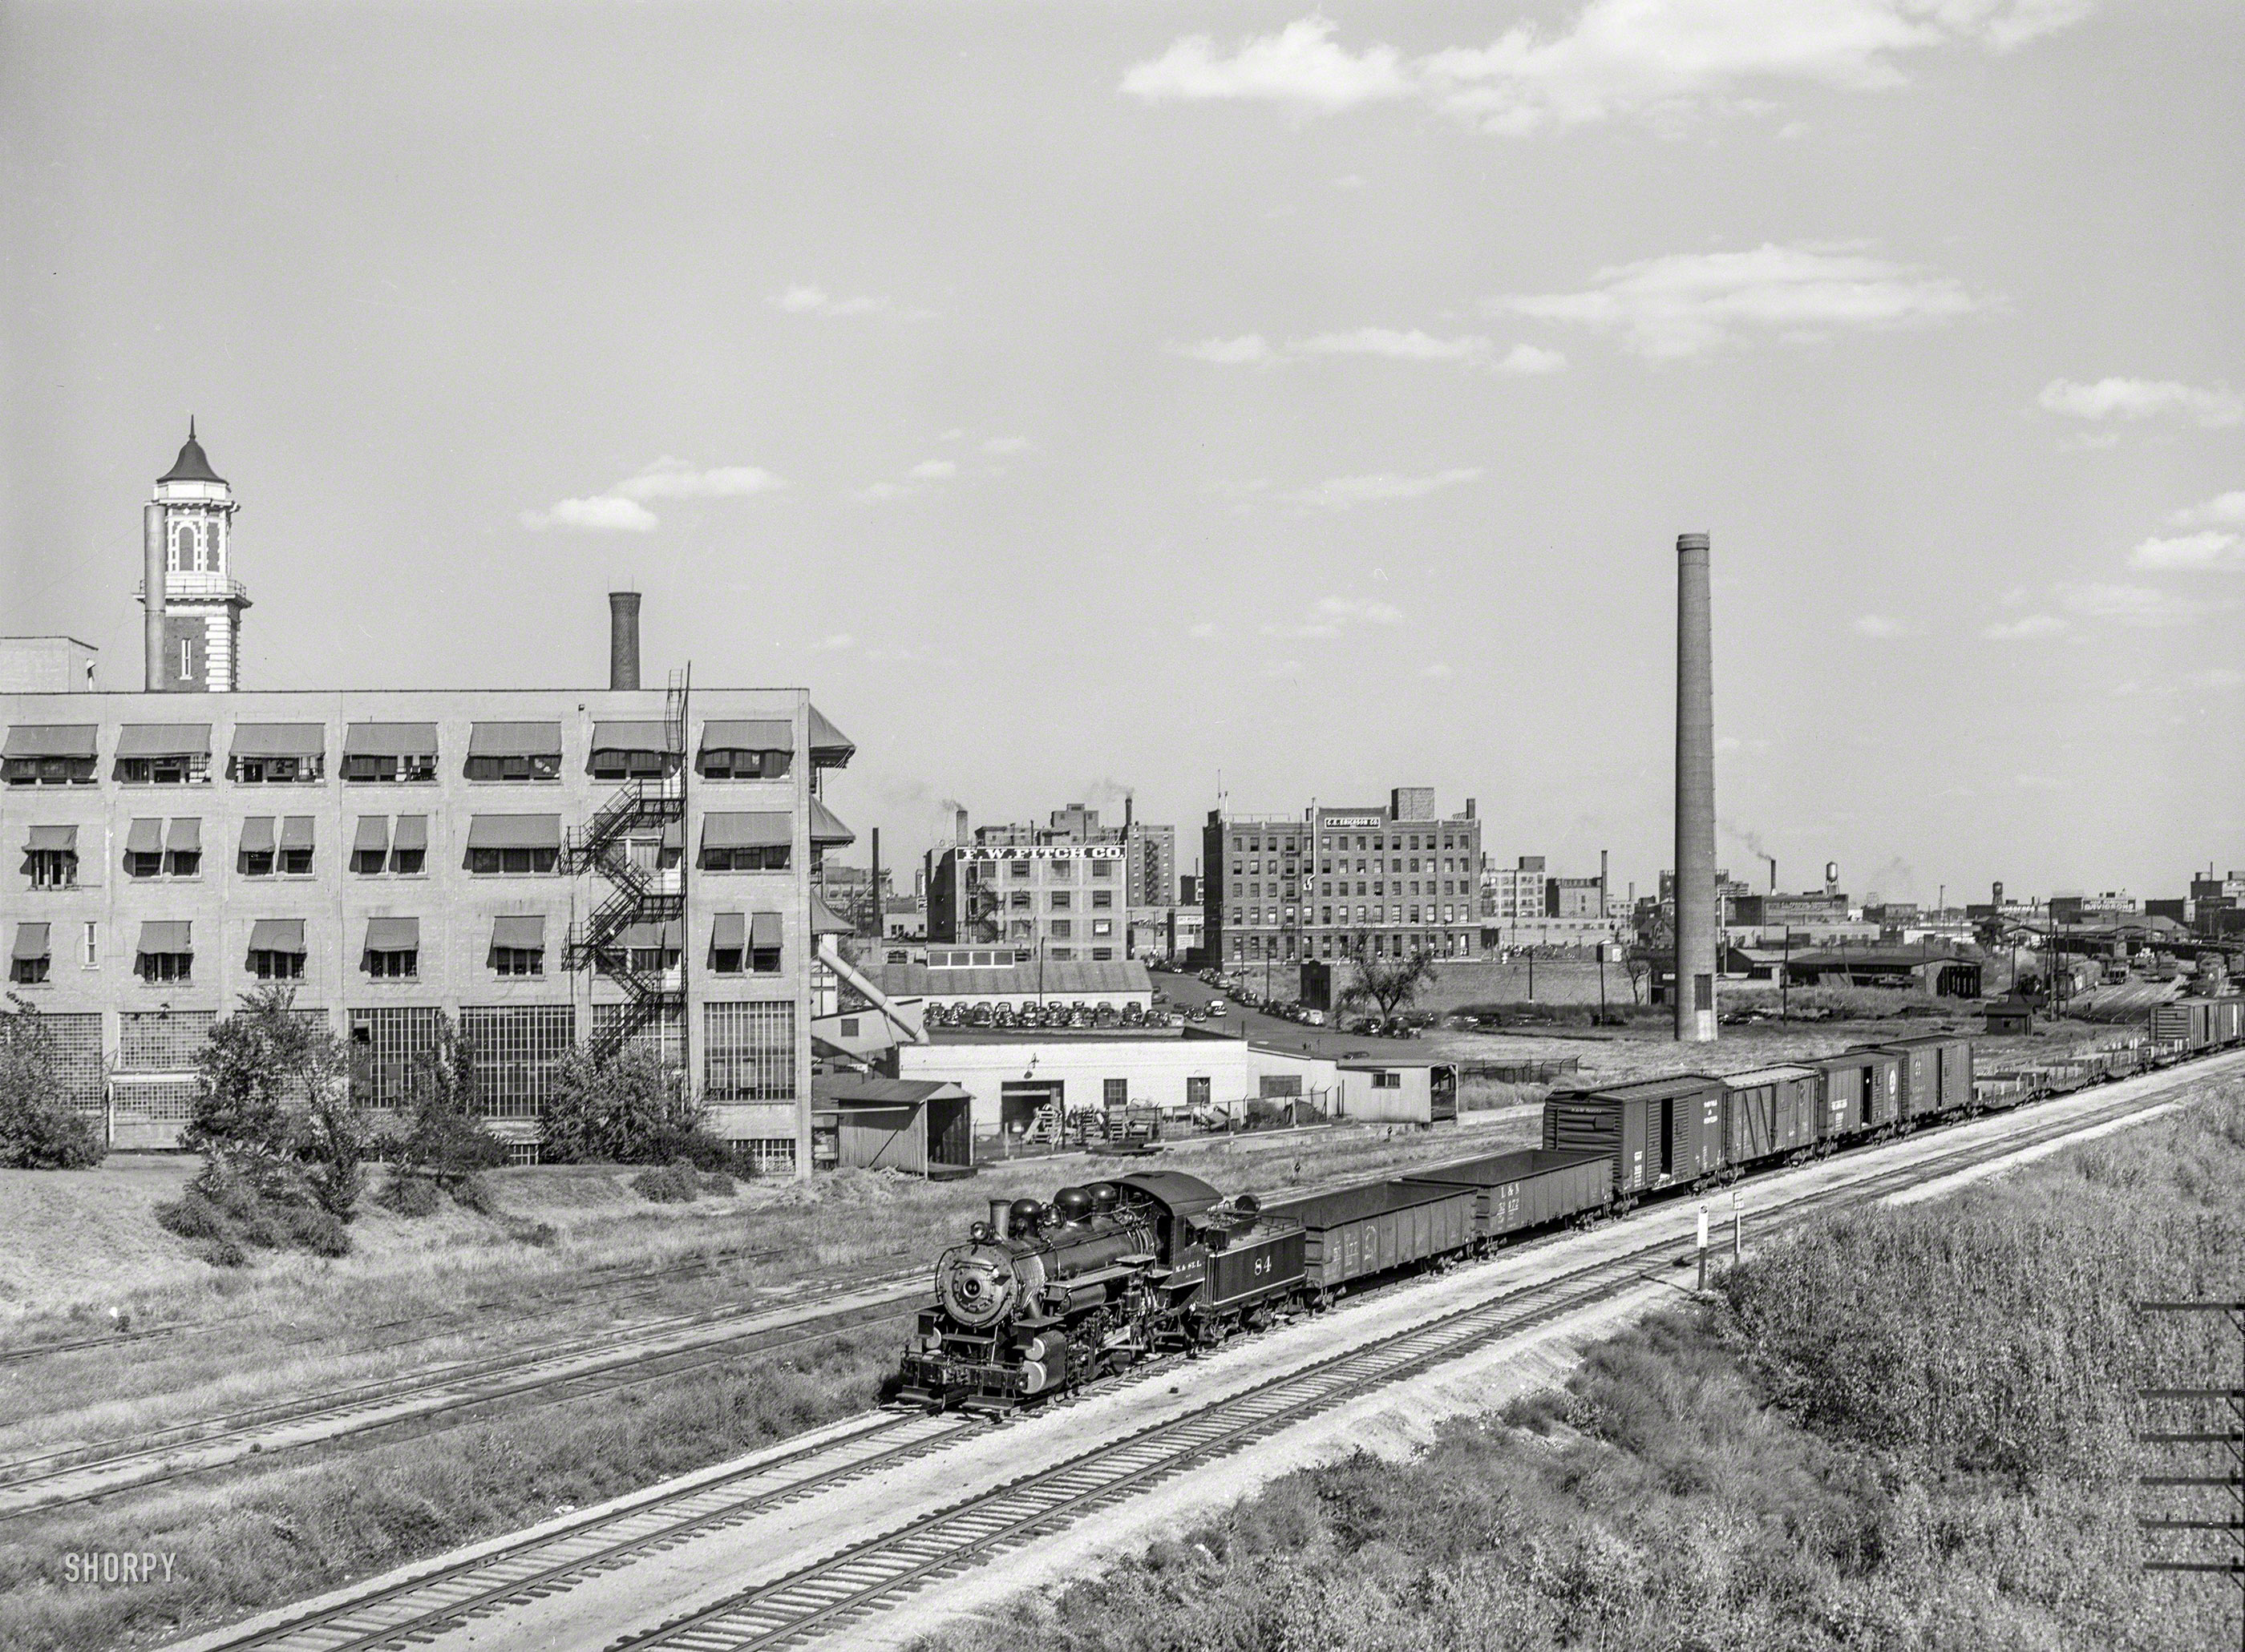 September 1939. "Factory buildings in Des Moines, Iowa." Photo by Arthur Rothstein for the Farm Security Administration. View full size.